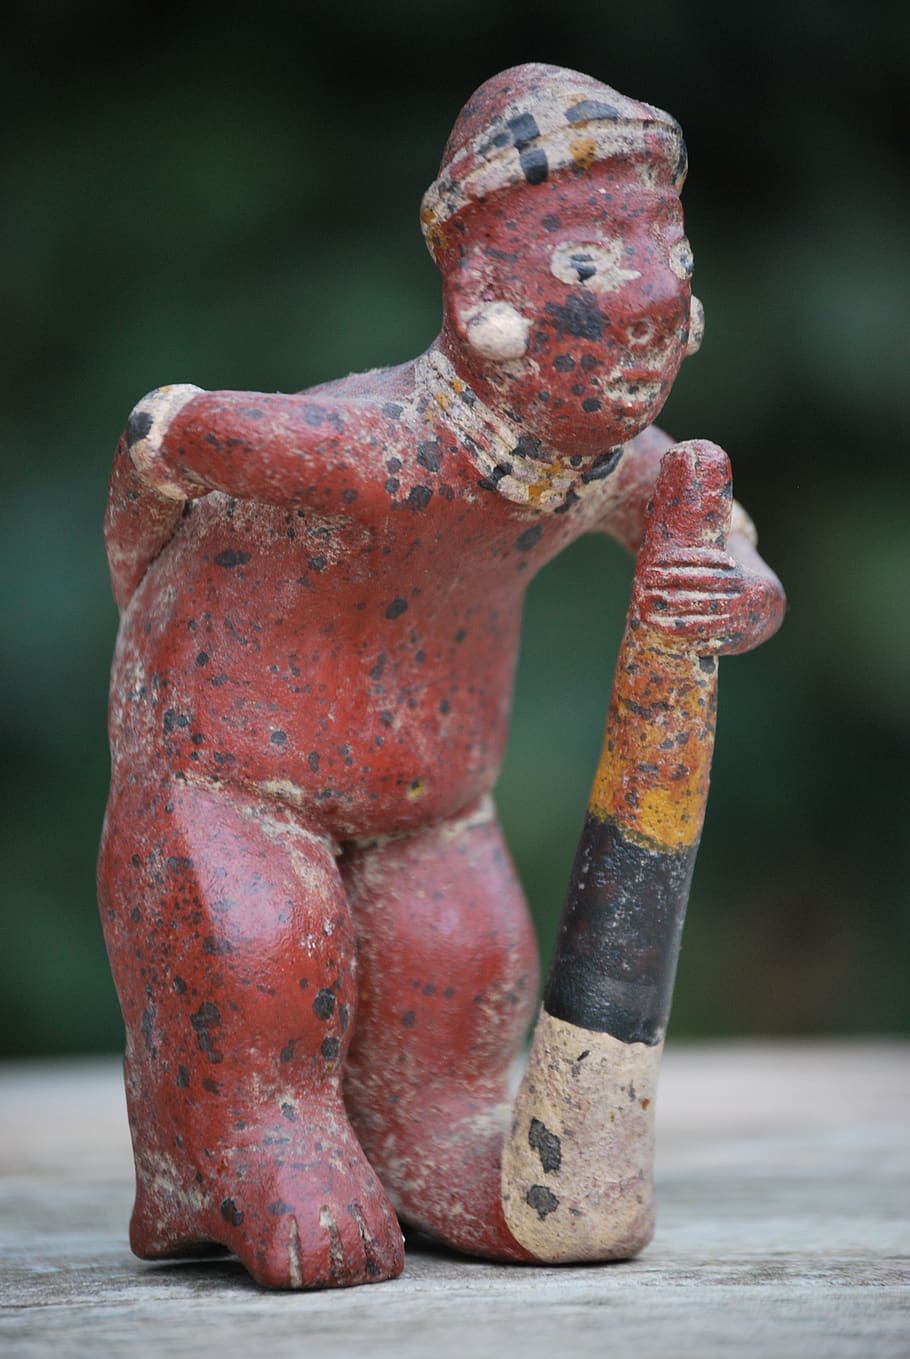 mexico, figurine, old man, walking stick, handmade, culture, focus on foreground, close-up, rusty, day